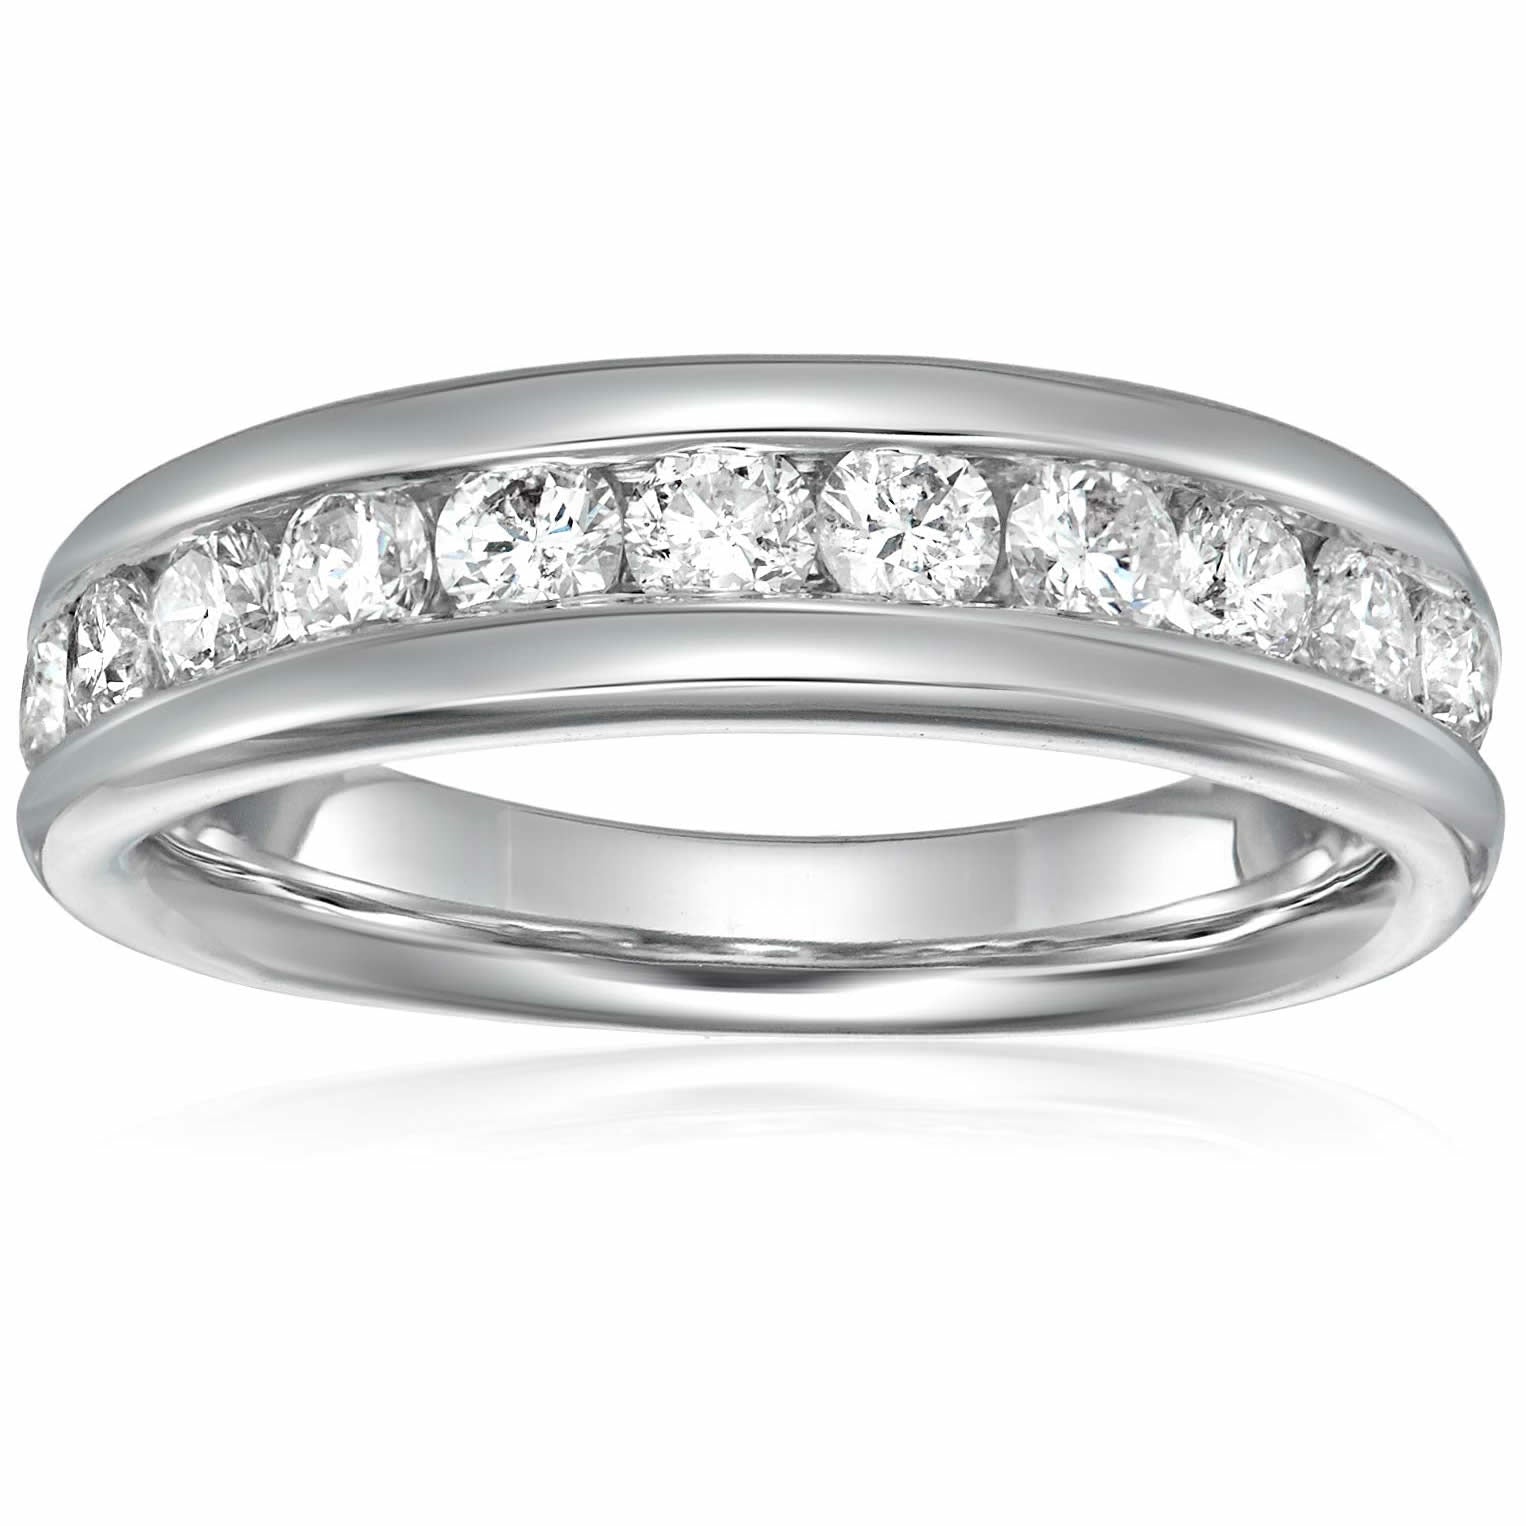 1 cttw Diamond Wedding Band for Women, Comfort Fit Diamond Wedding Band in 14K White Gold Channel Set, Size 4.5-10